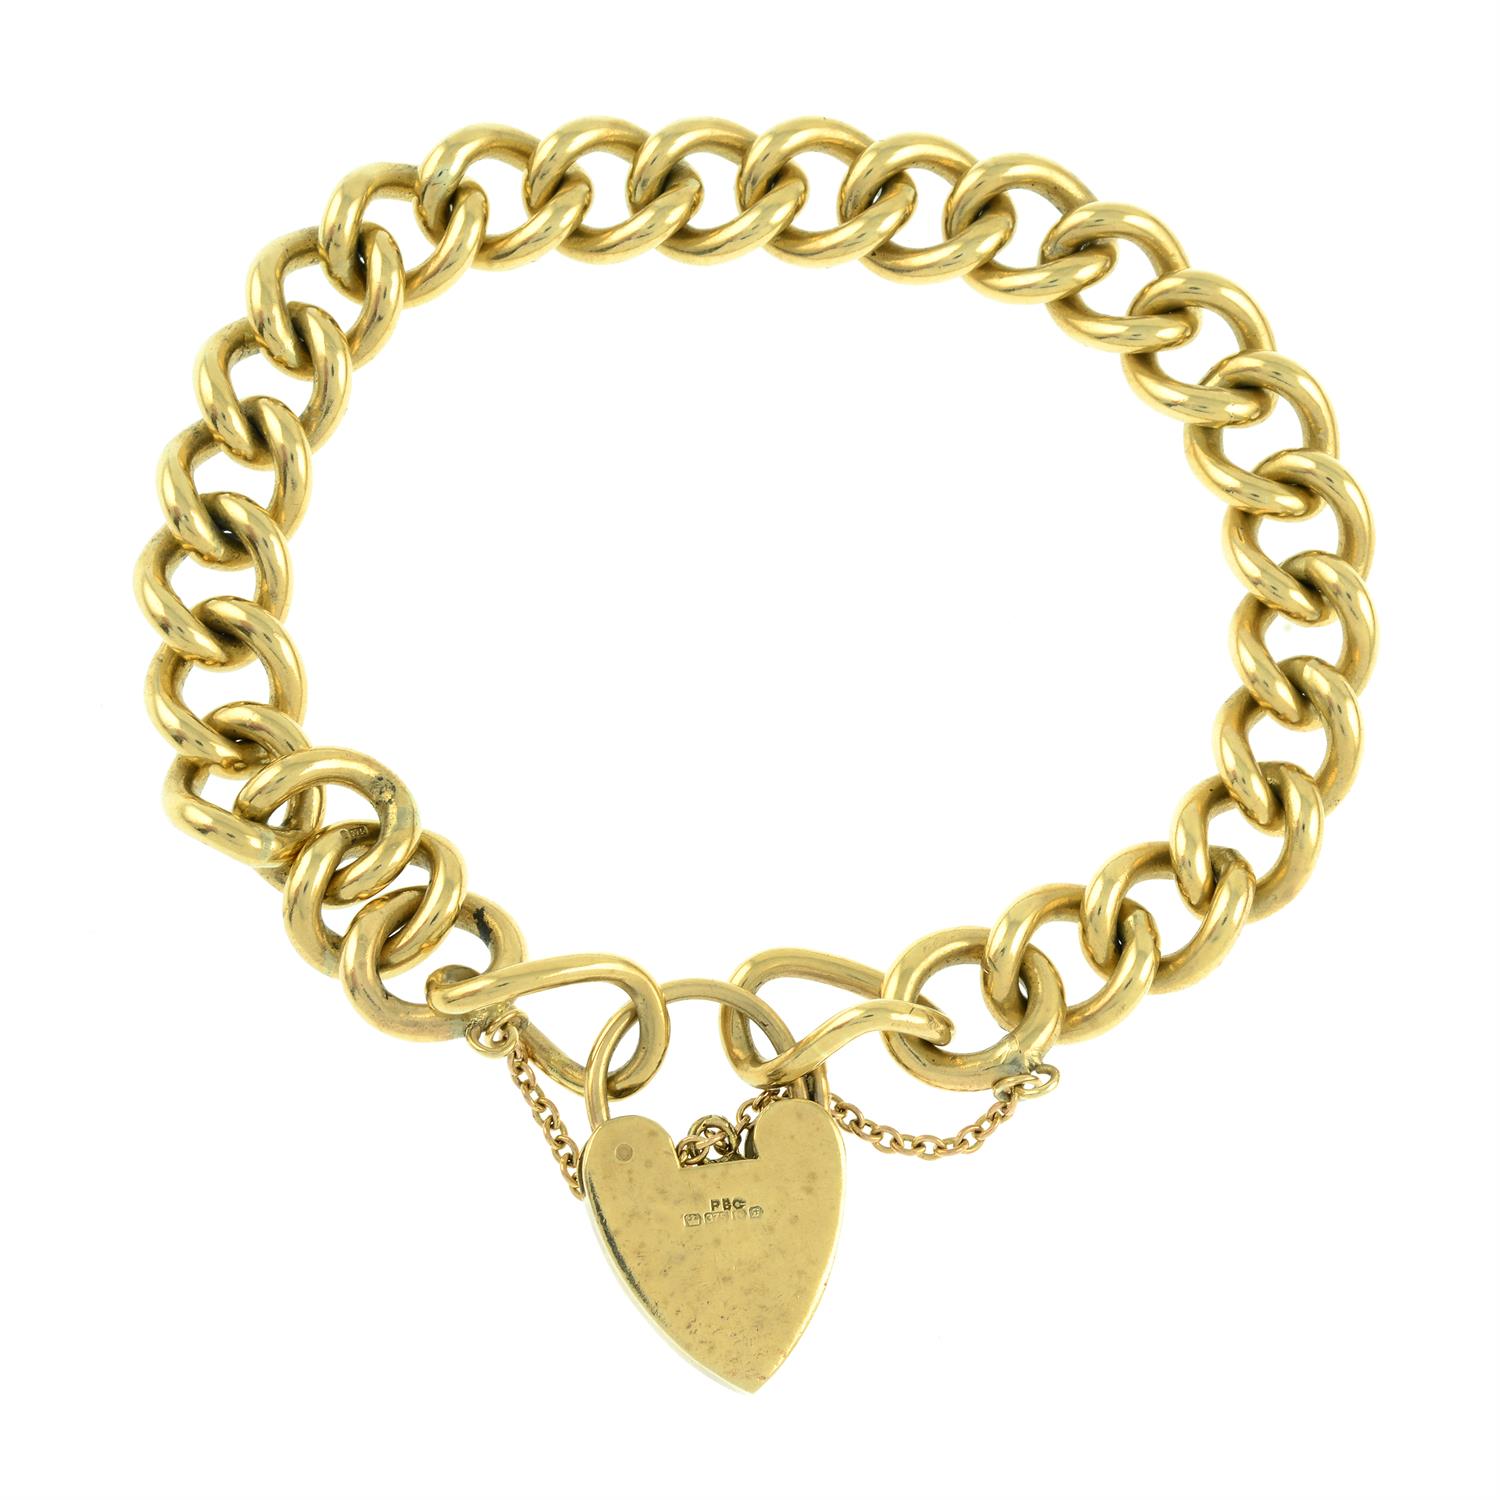 A 9ct gold bracelet, with heart-shape padlock clasp. - Image 2 of 2